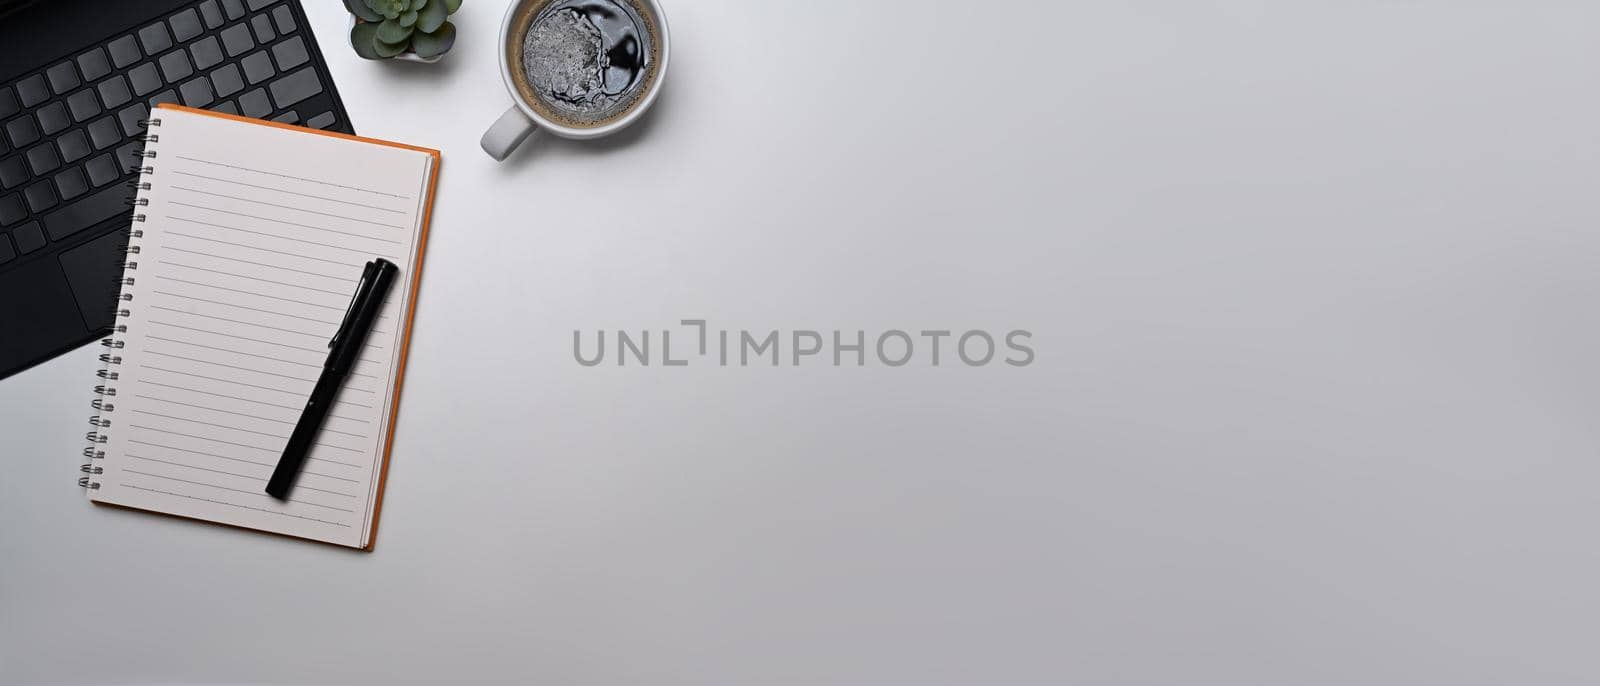 Flat lay blank notebook, laptop computer, and coffee cup on white background. Copy space for your text.